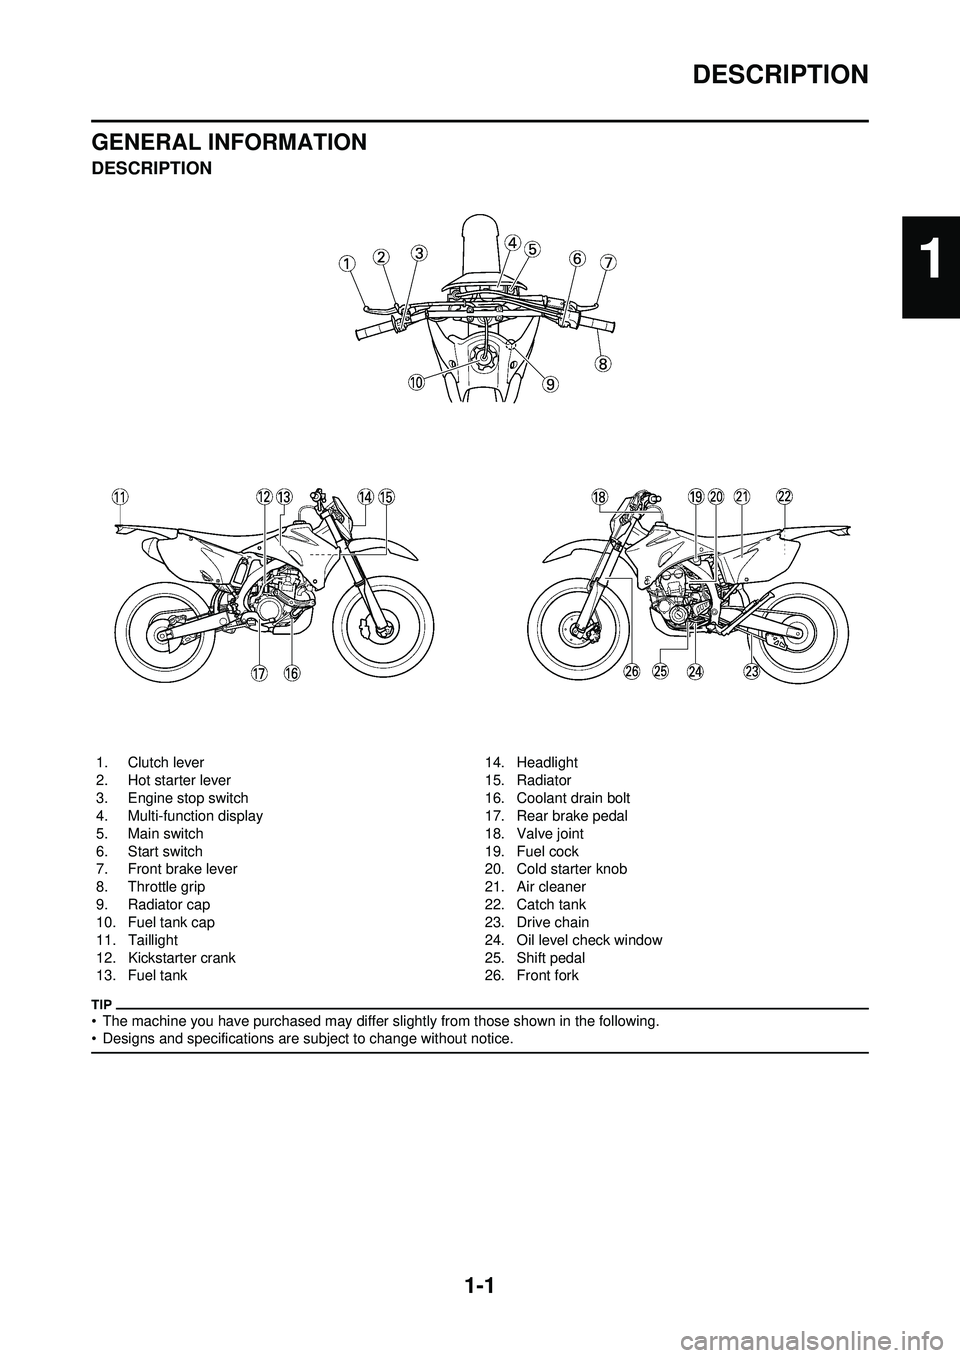 YAMAHA WR 250F 2009  Owners Manual 1-1
DESCRIPTION
GENERAL INFORMATION
DESCRIPTION
• The machine you have purchased may differ slightly from those shown in the following.
• Designs and specifications are subject to change without n